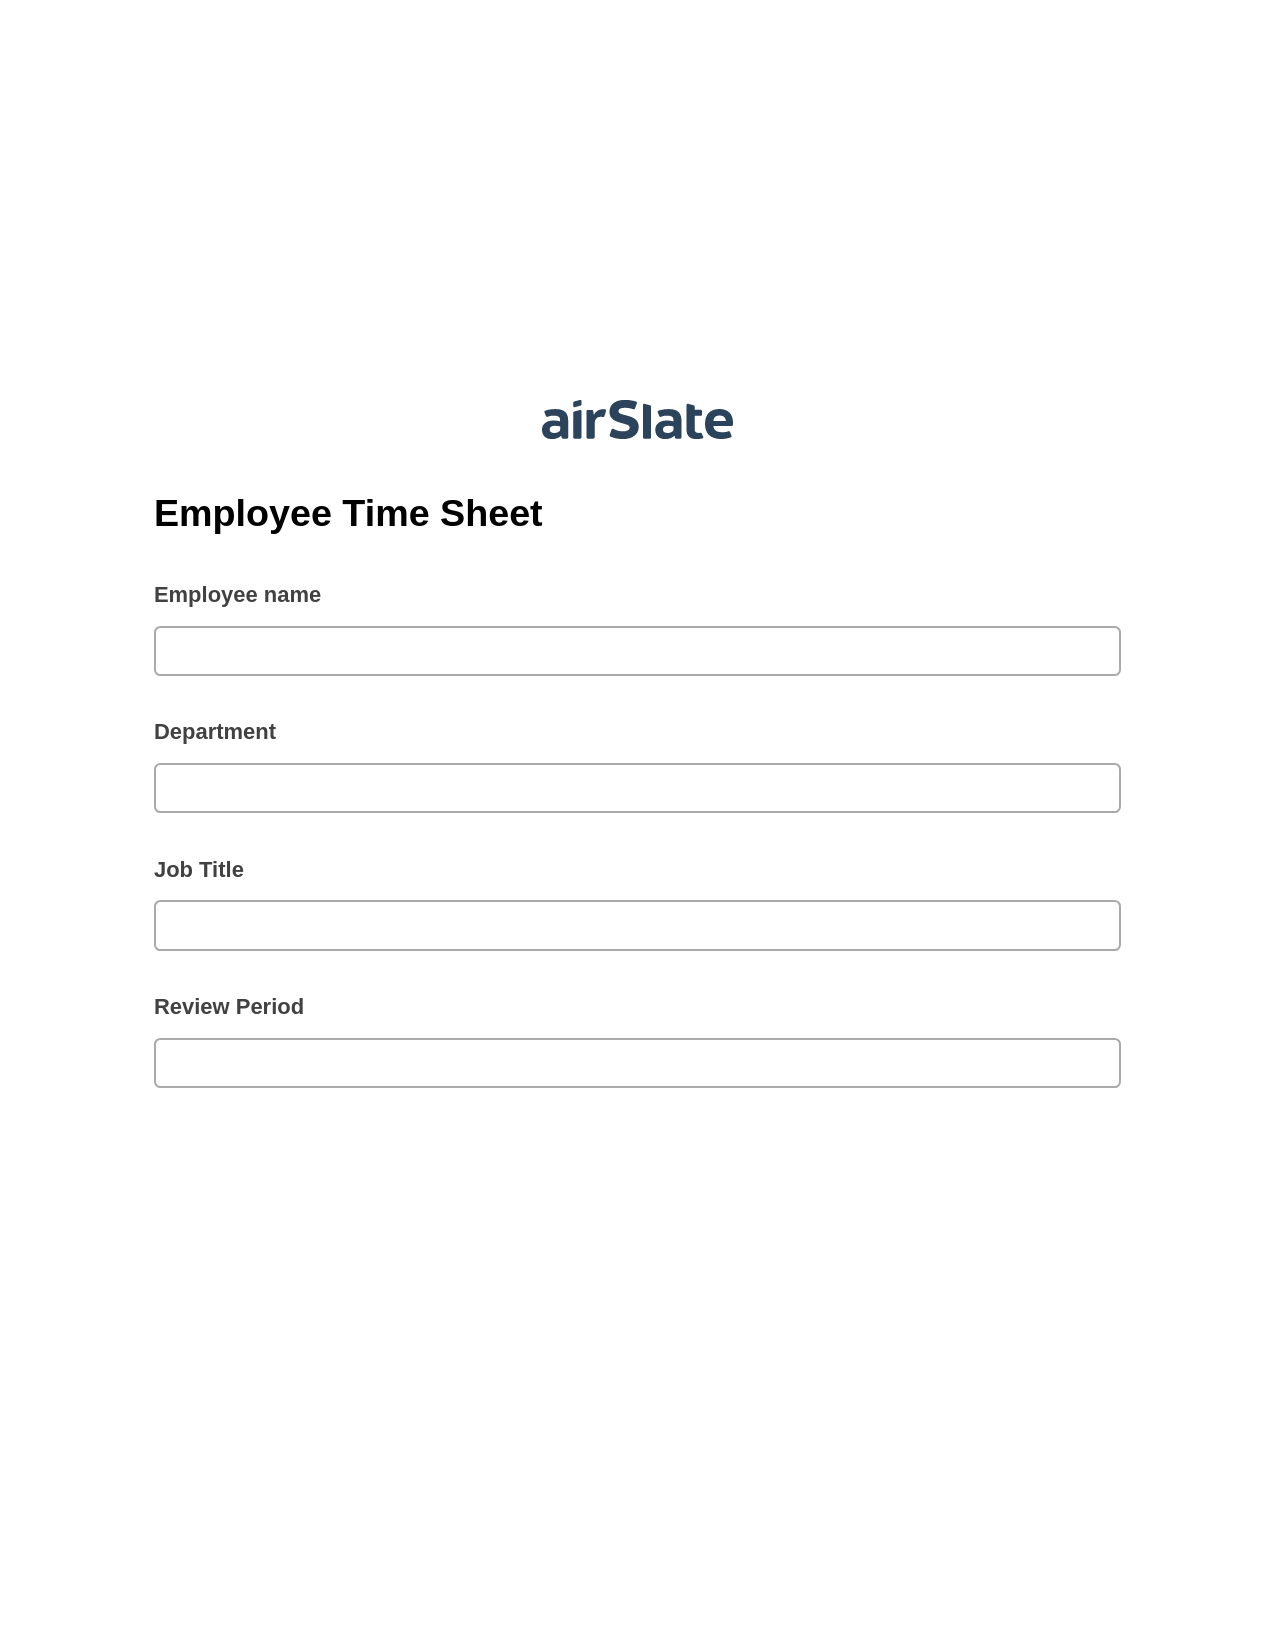 Employee Time Sheet Pre-fill Dropdowns from MySQL Bot, Update Audit Trail Bot, Export to Smartsheet